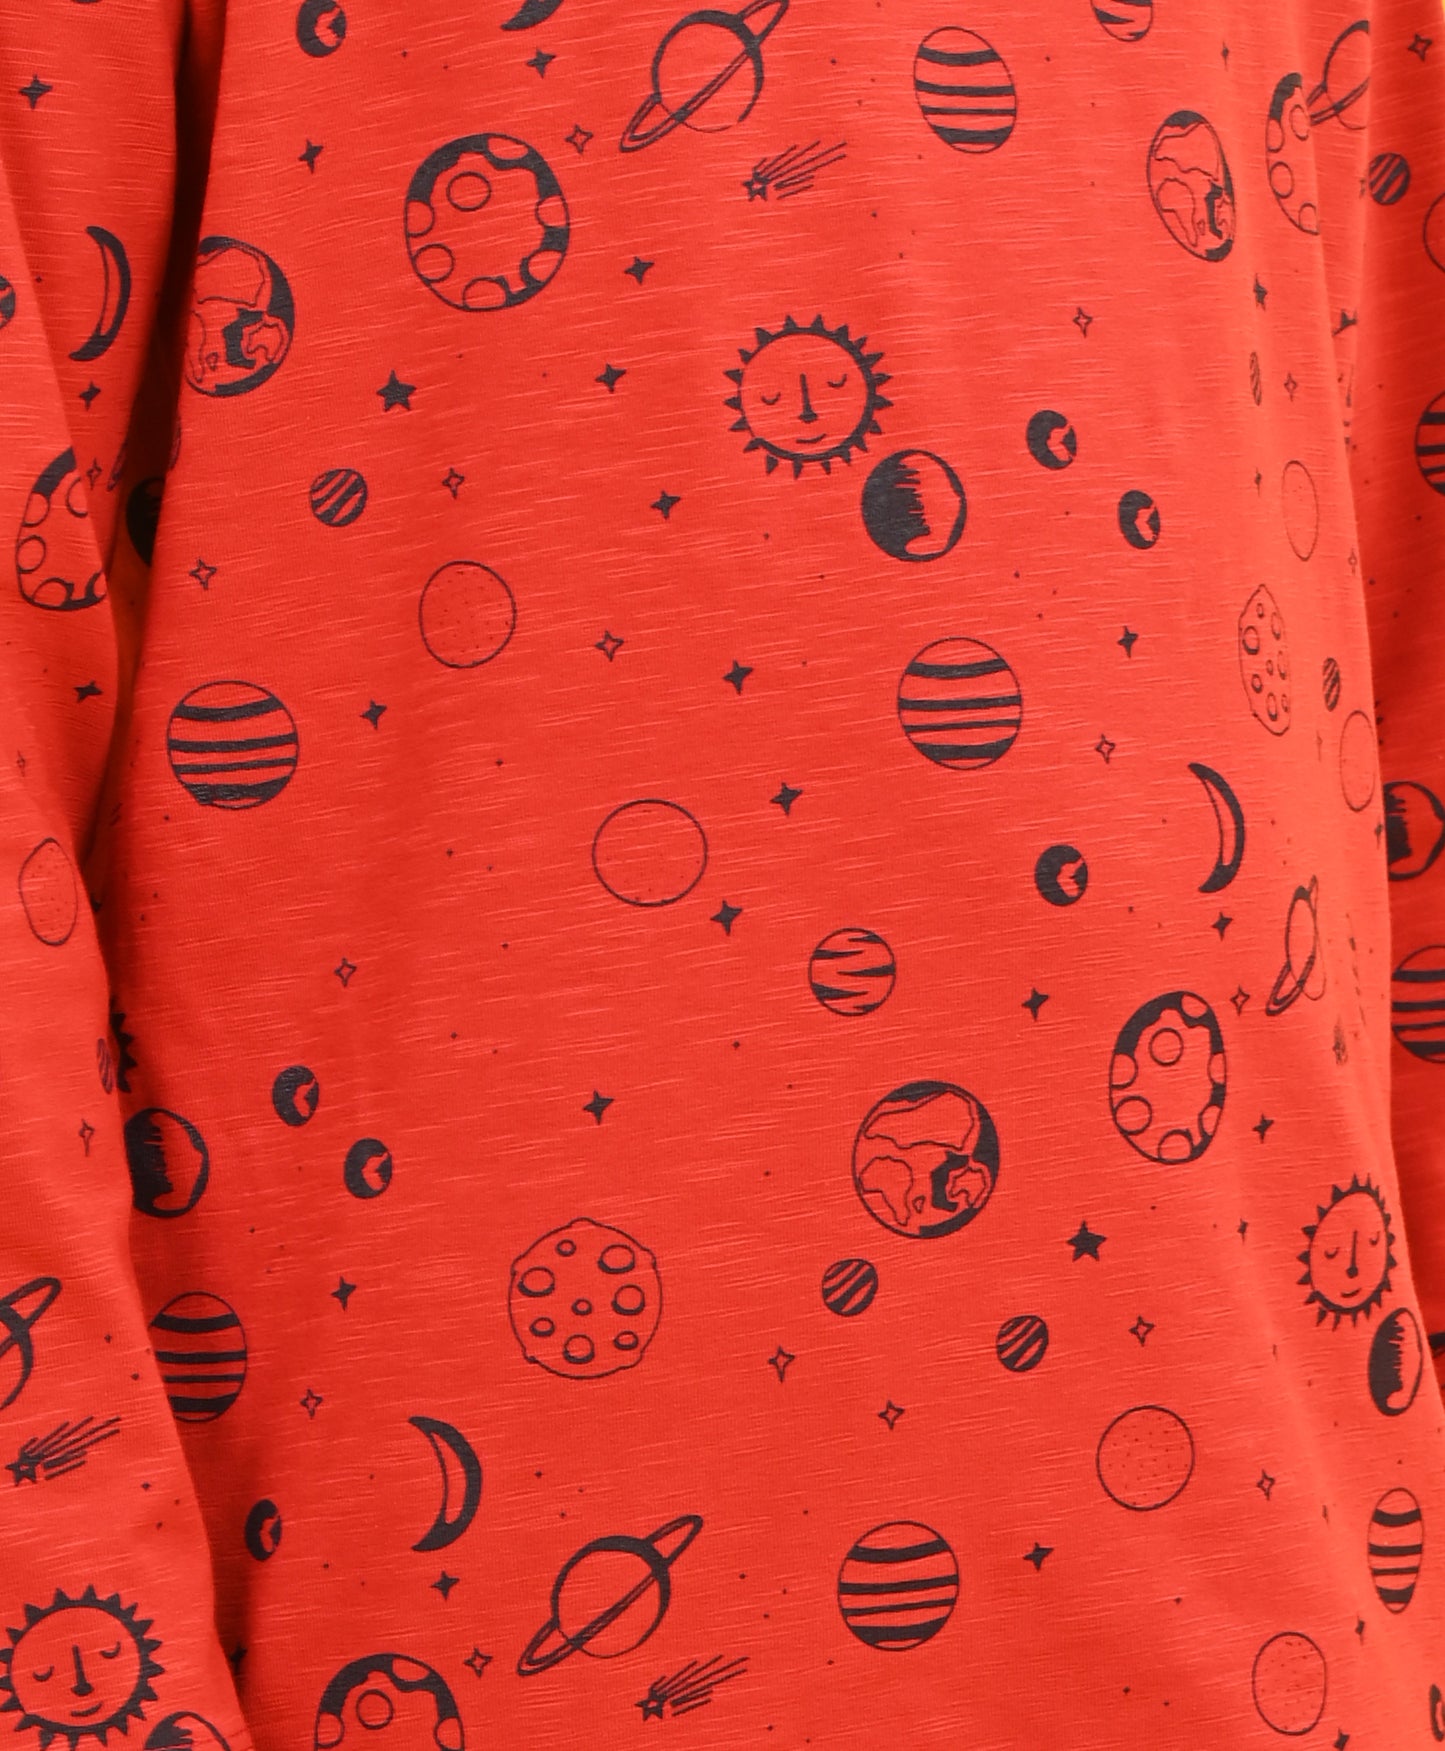 RED SOLAR SYSTEM LONG SLEEVES PYJAMA SET D - RED